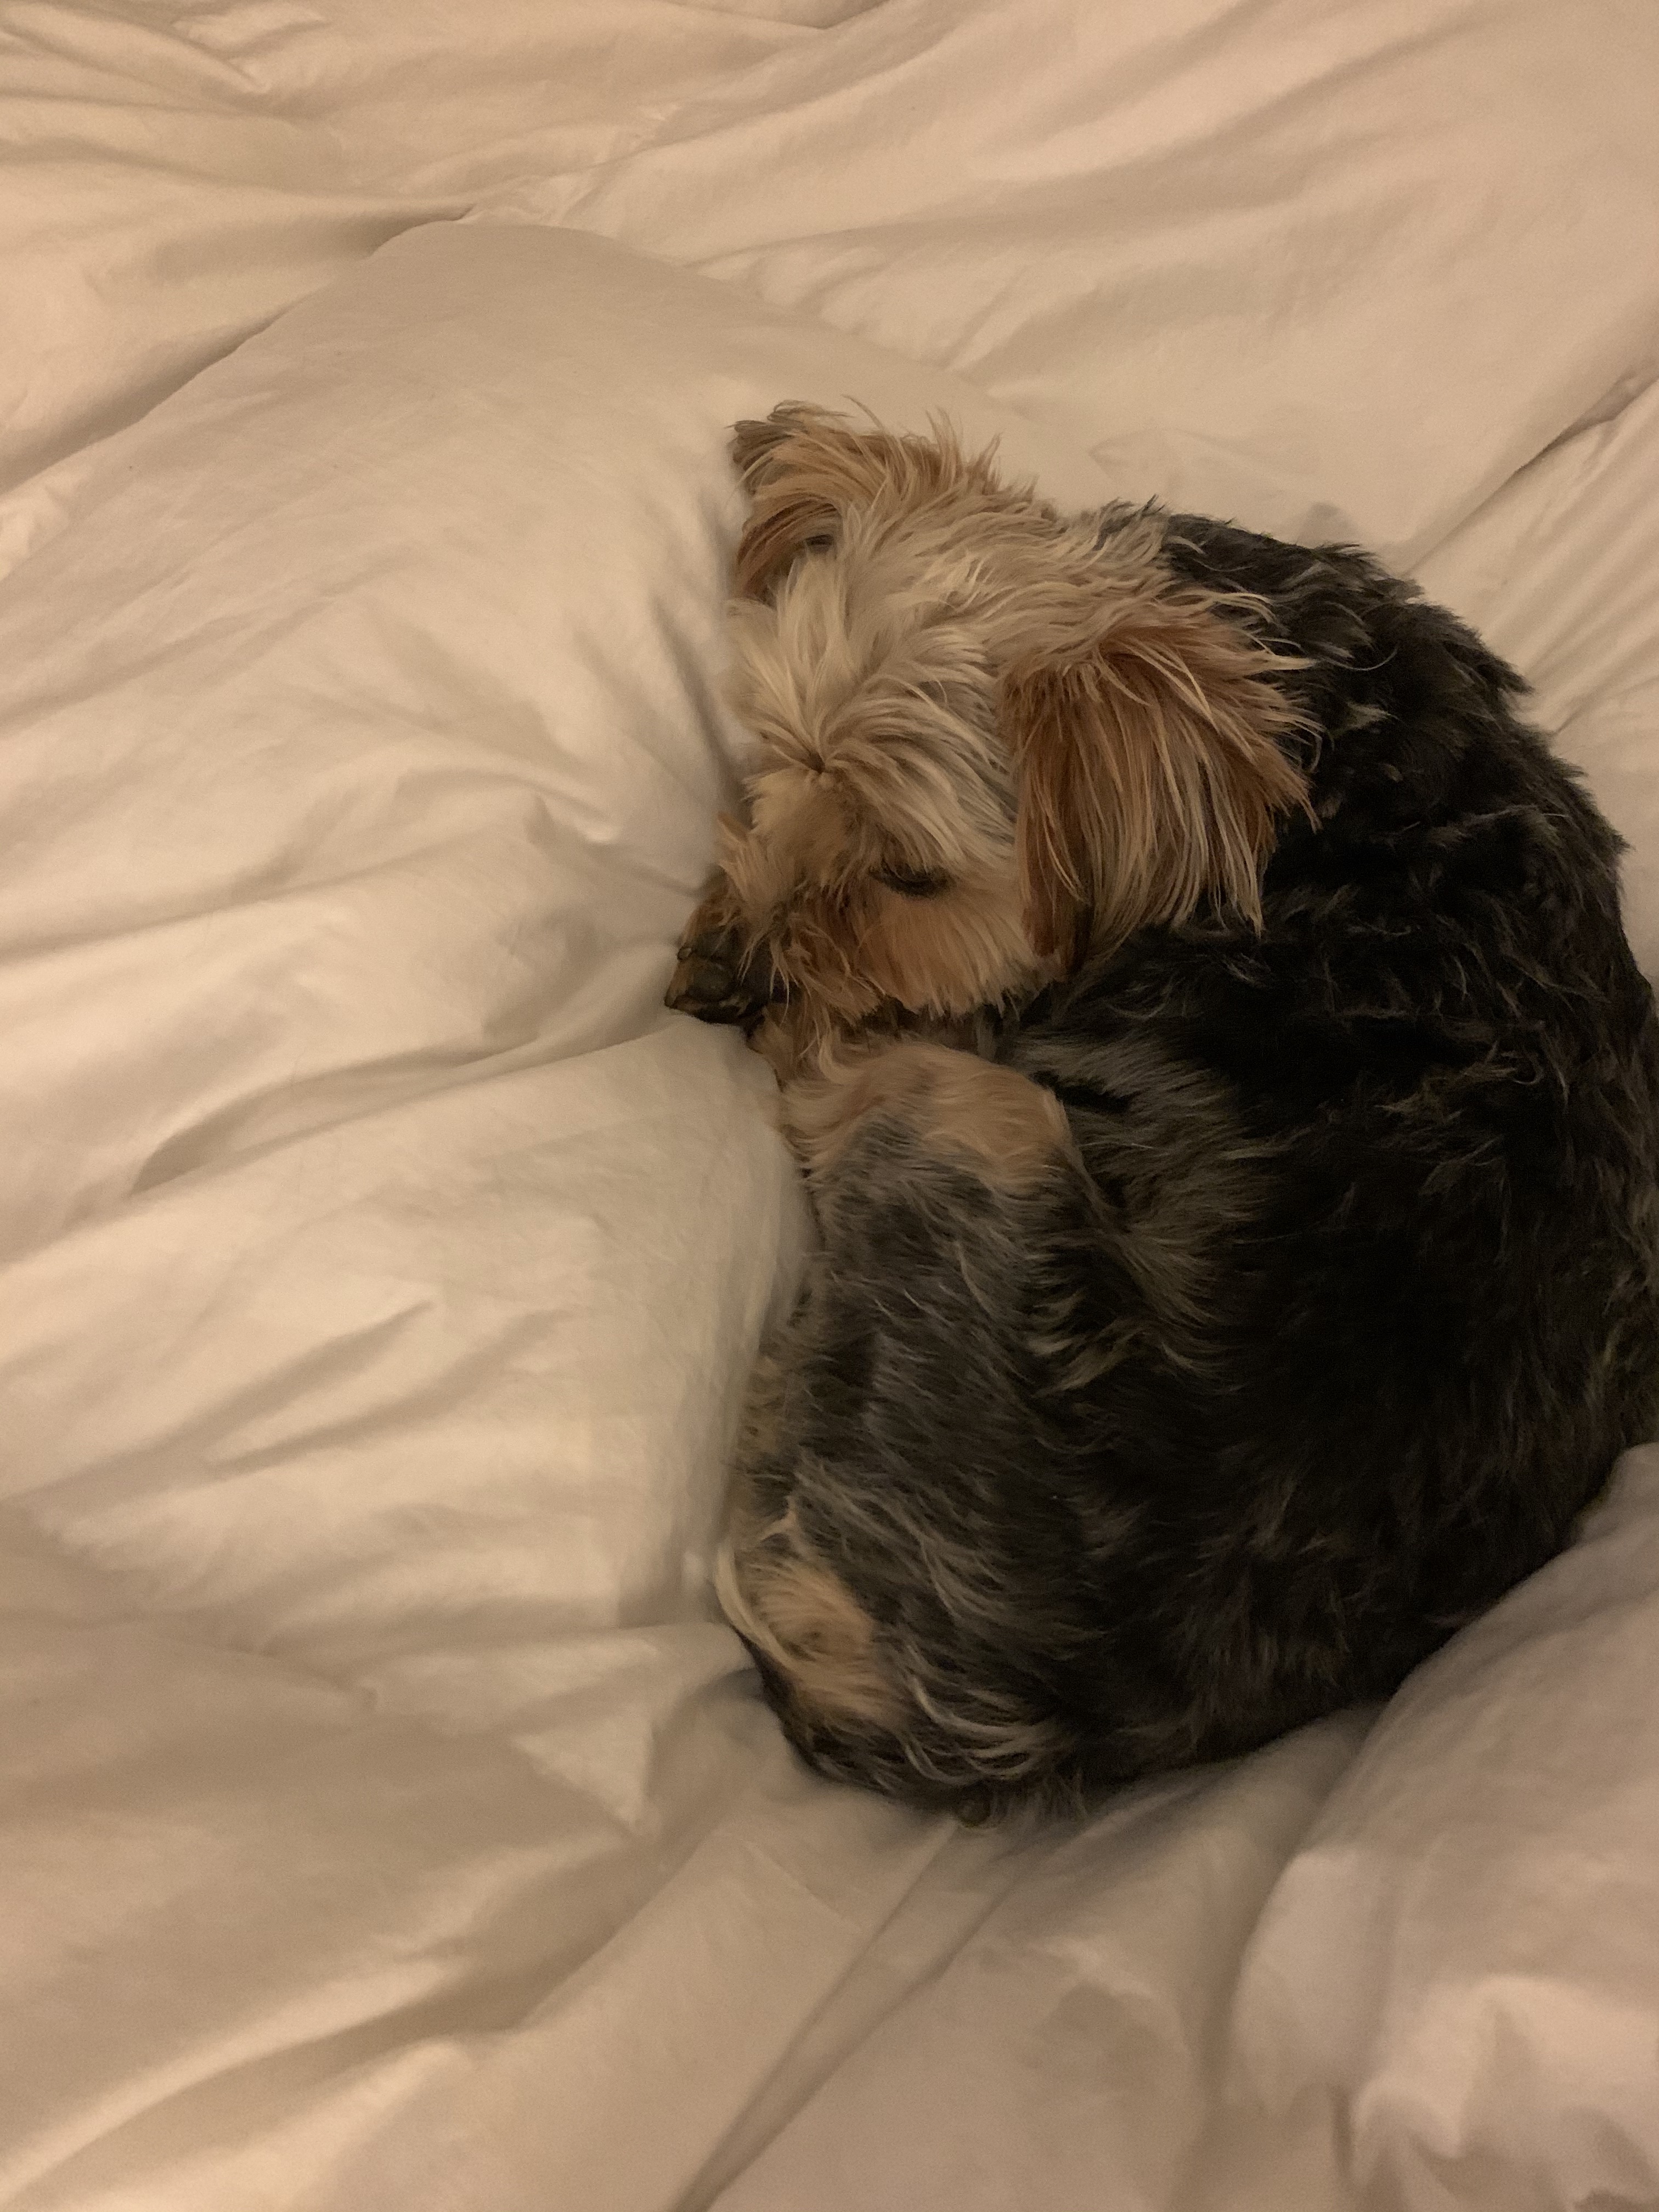 cute picture my Yorkie dog, Teddie curled up in bed